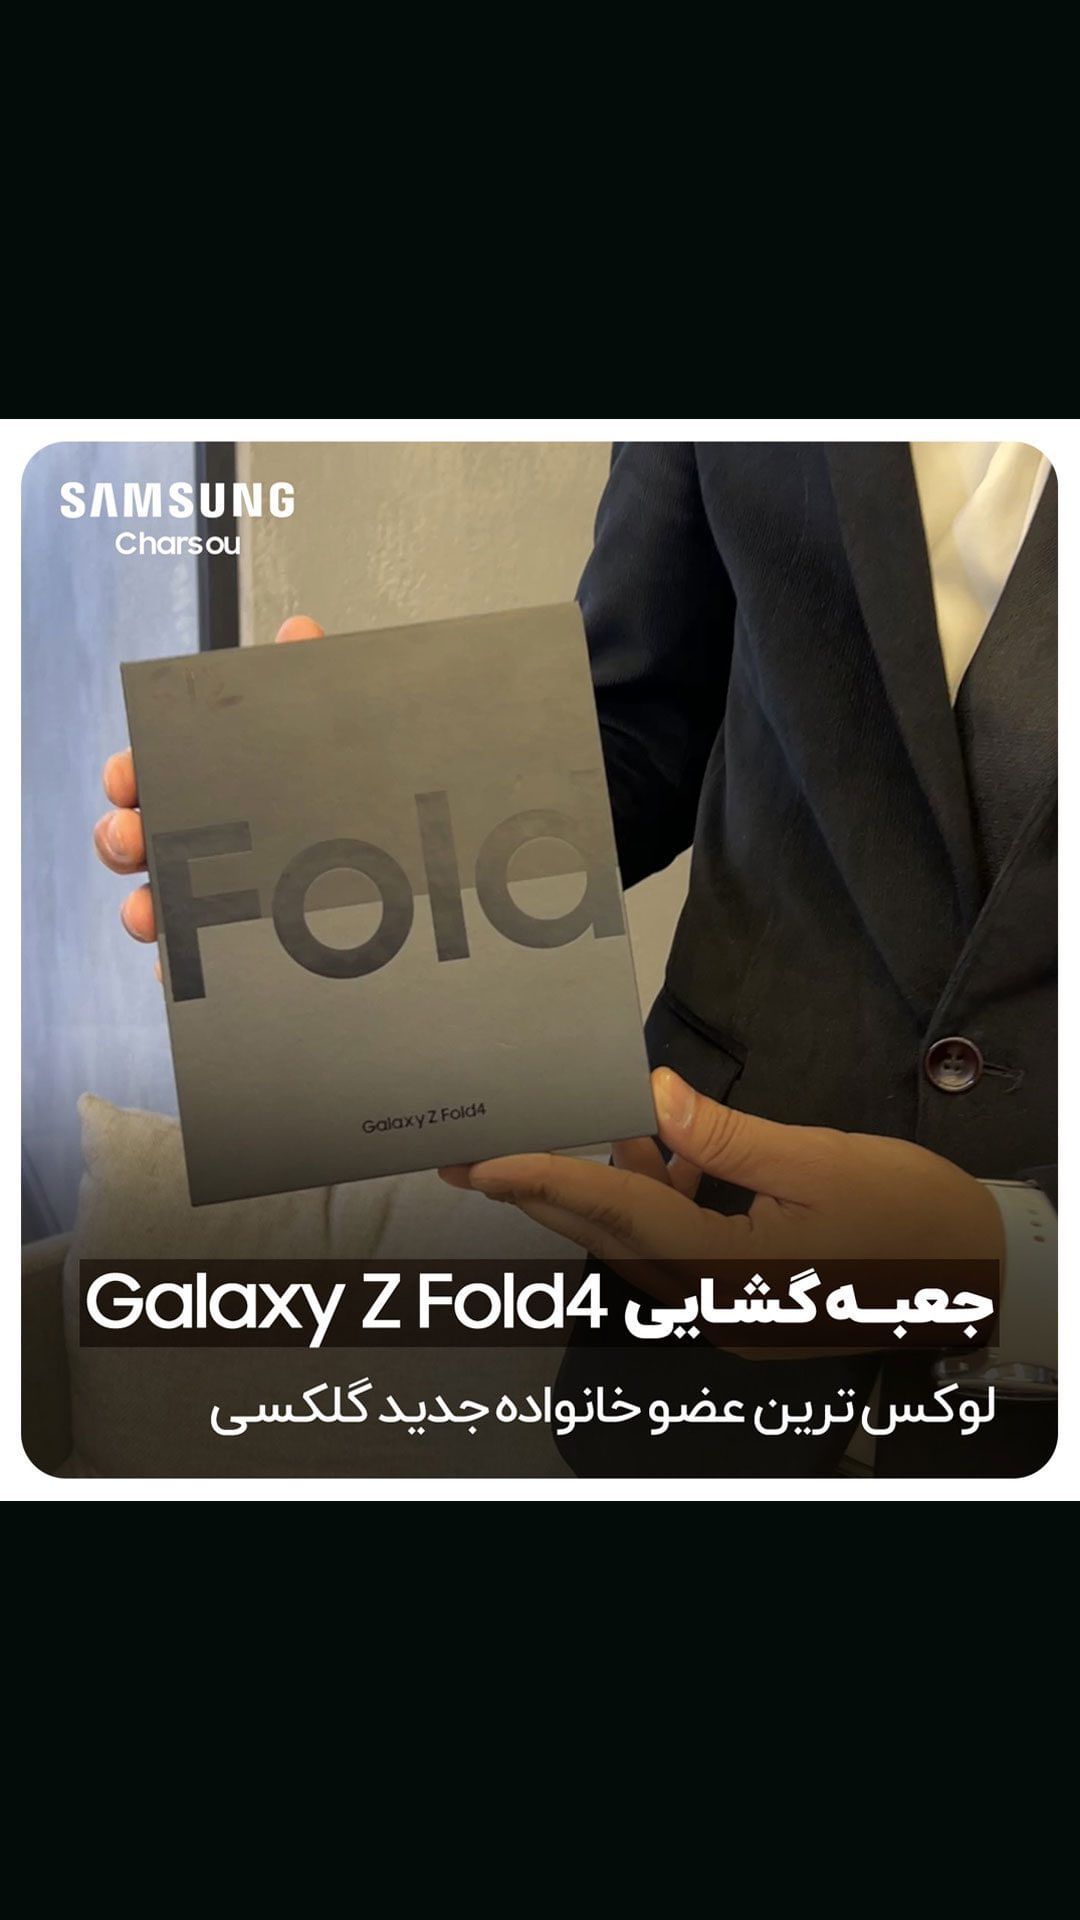 One of the top publications of @samsung.charsou which has 5.7K likes and 171 comments